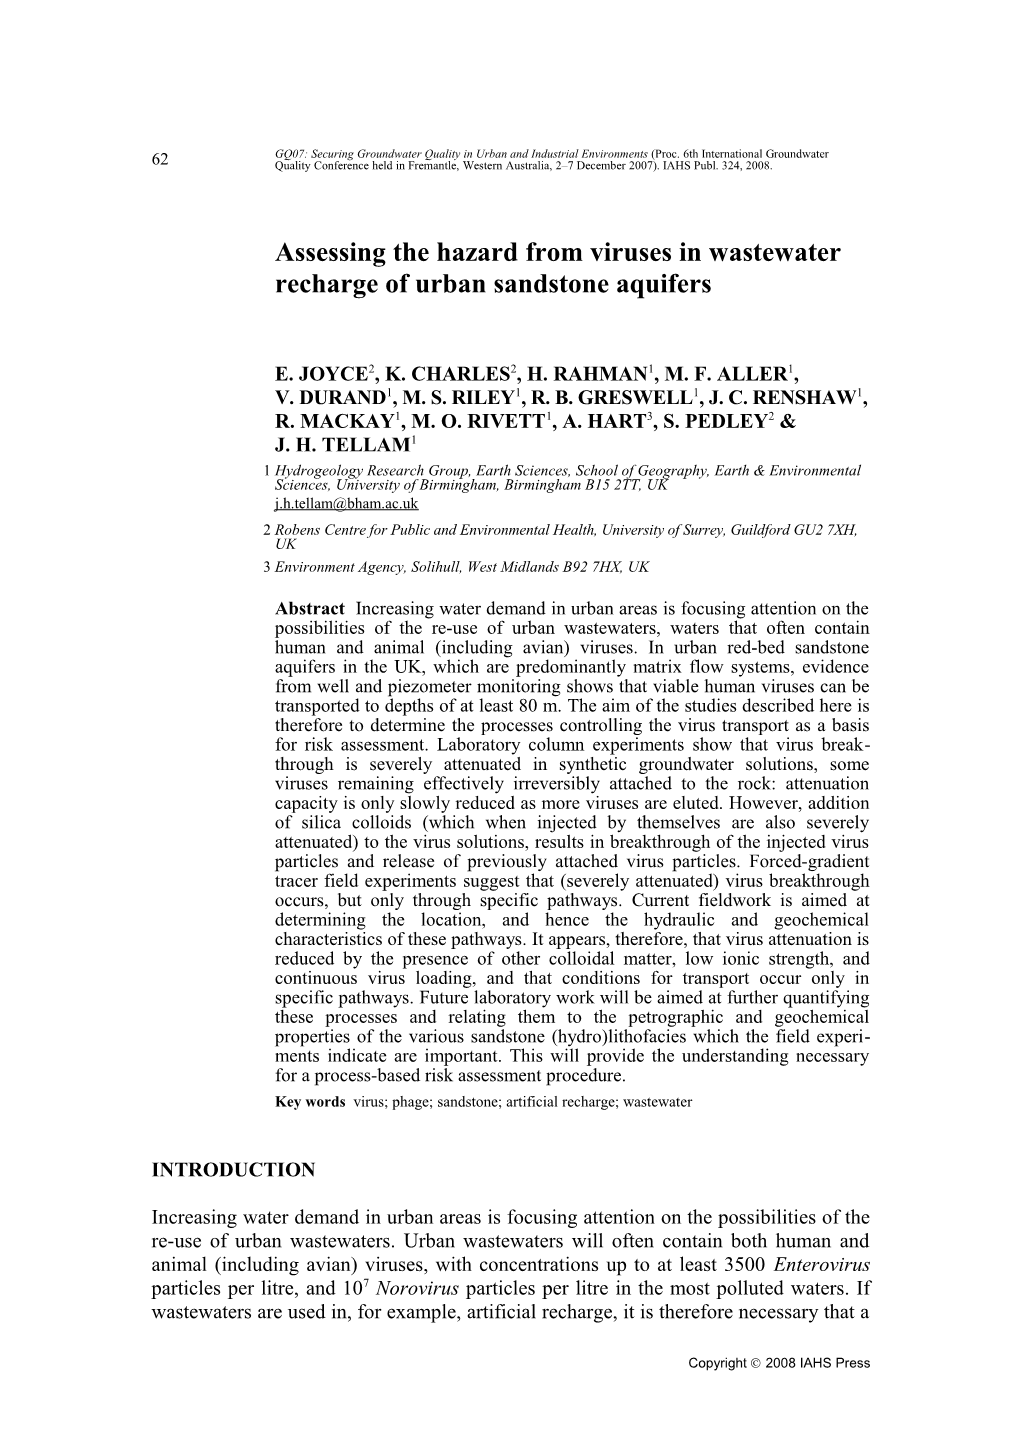 Assessing the Hazard from Viruses in Wastewater Recharge of Urban Sandstone Aquifers